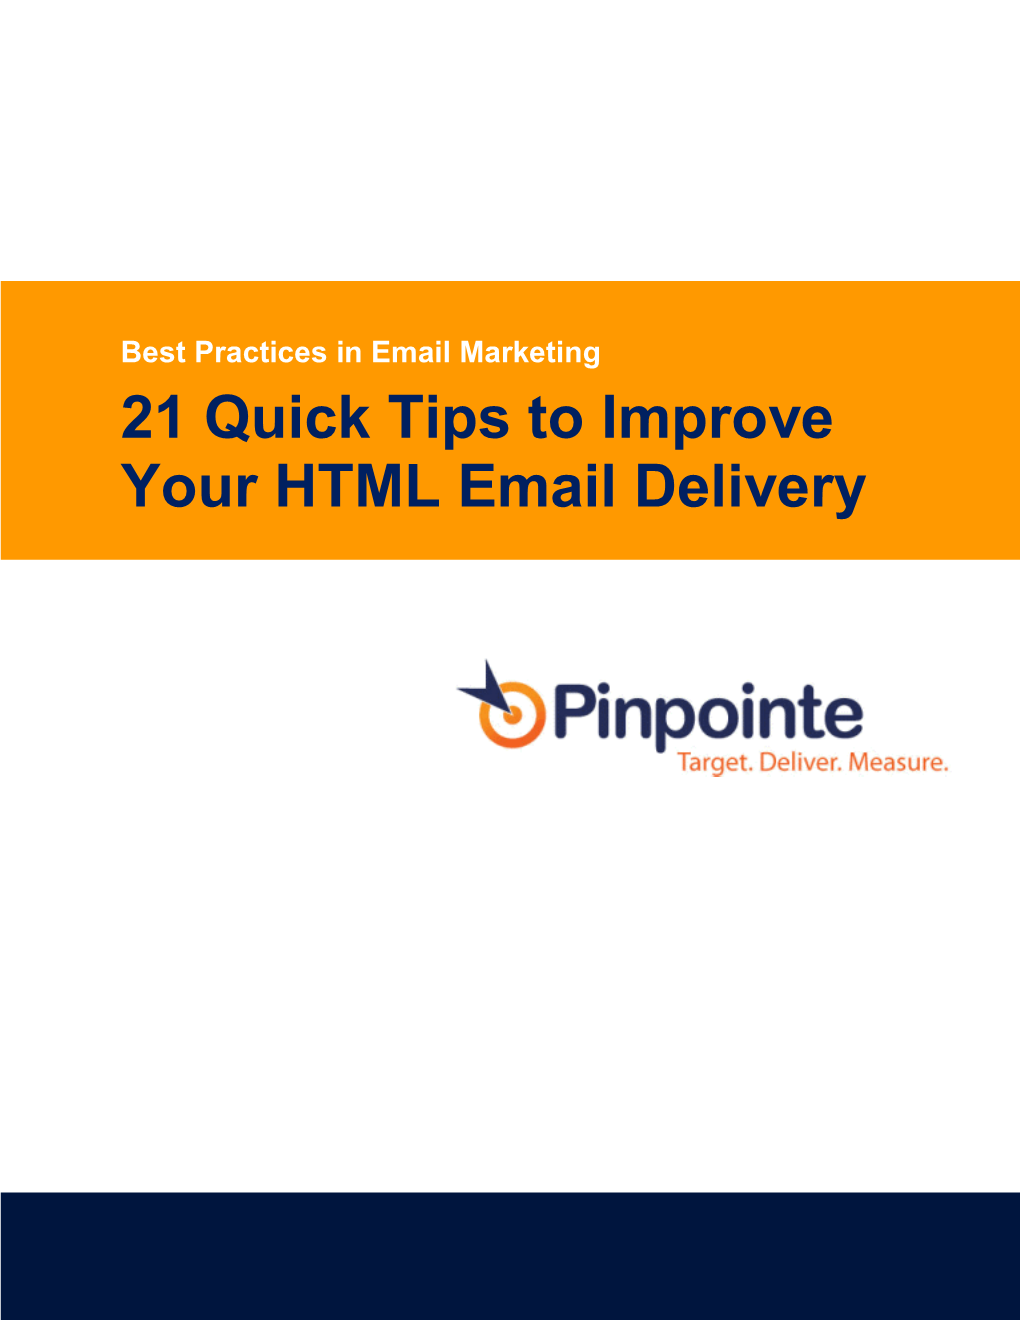 21 Quick Tips to Improve Your HTML Email Delivery